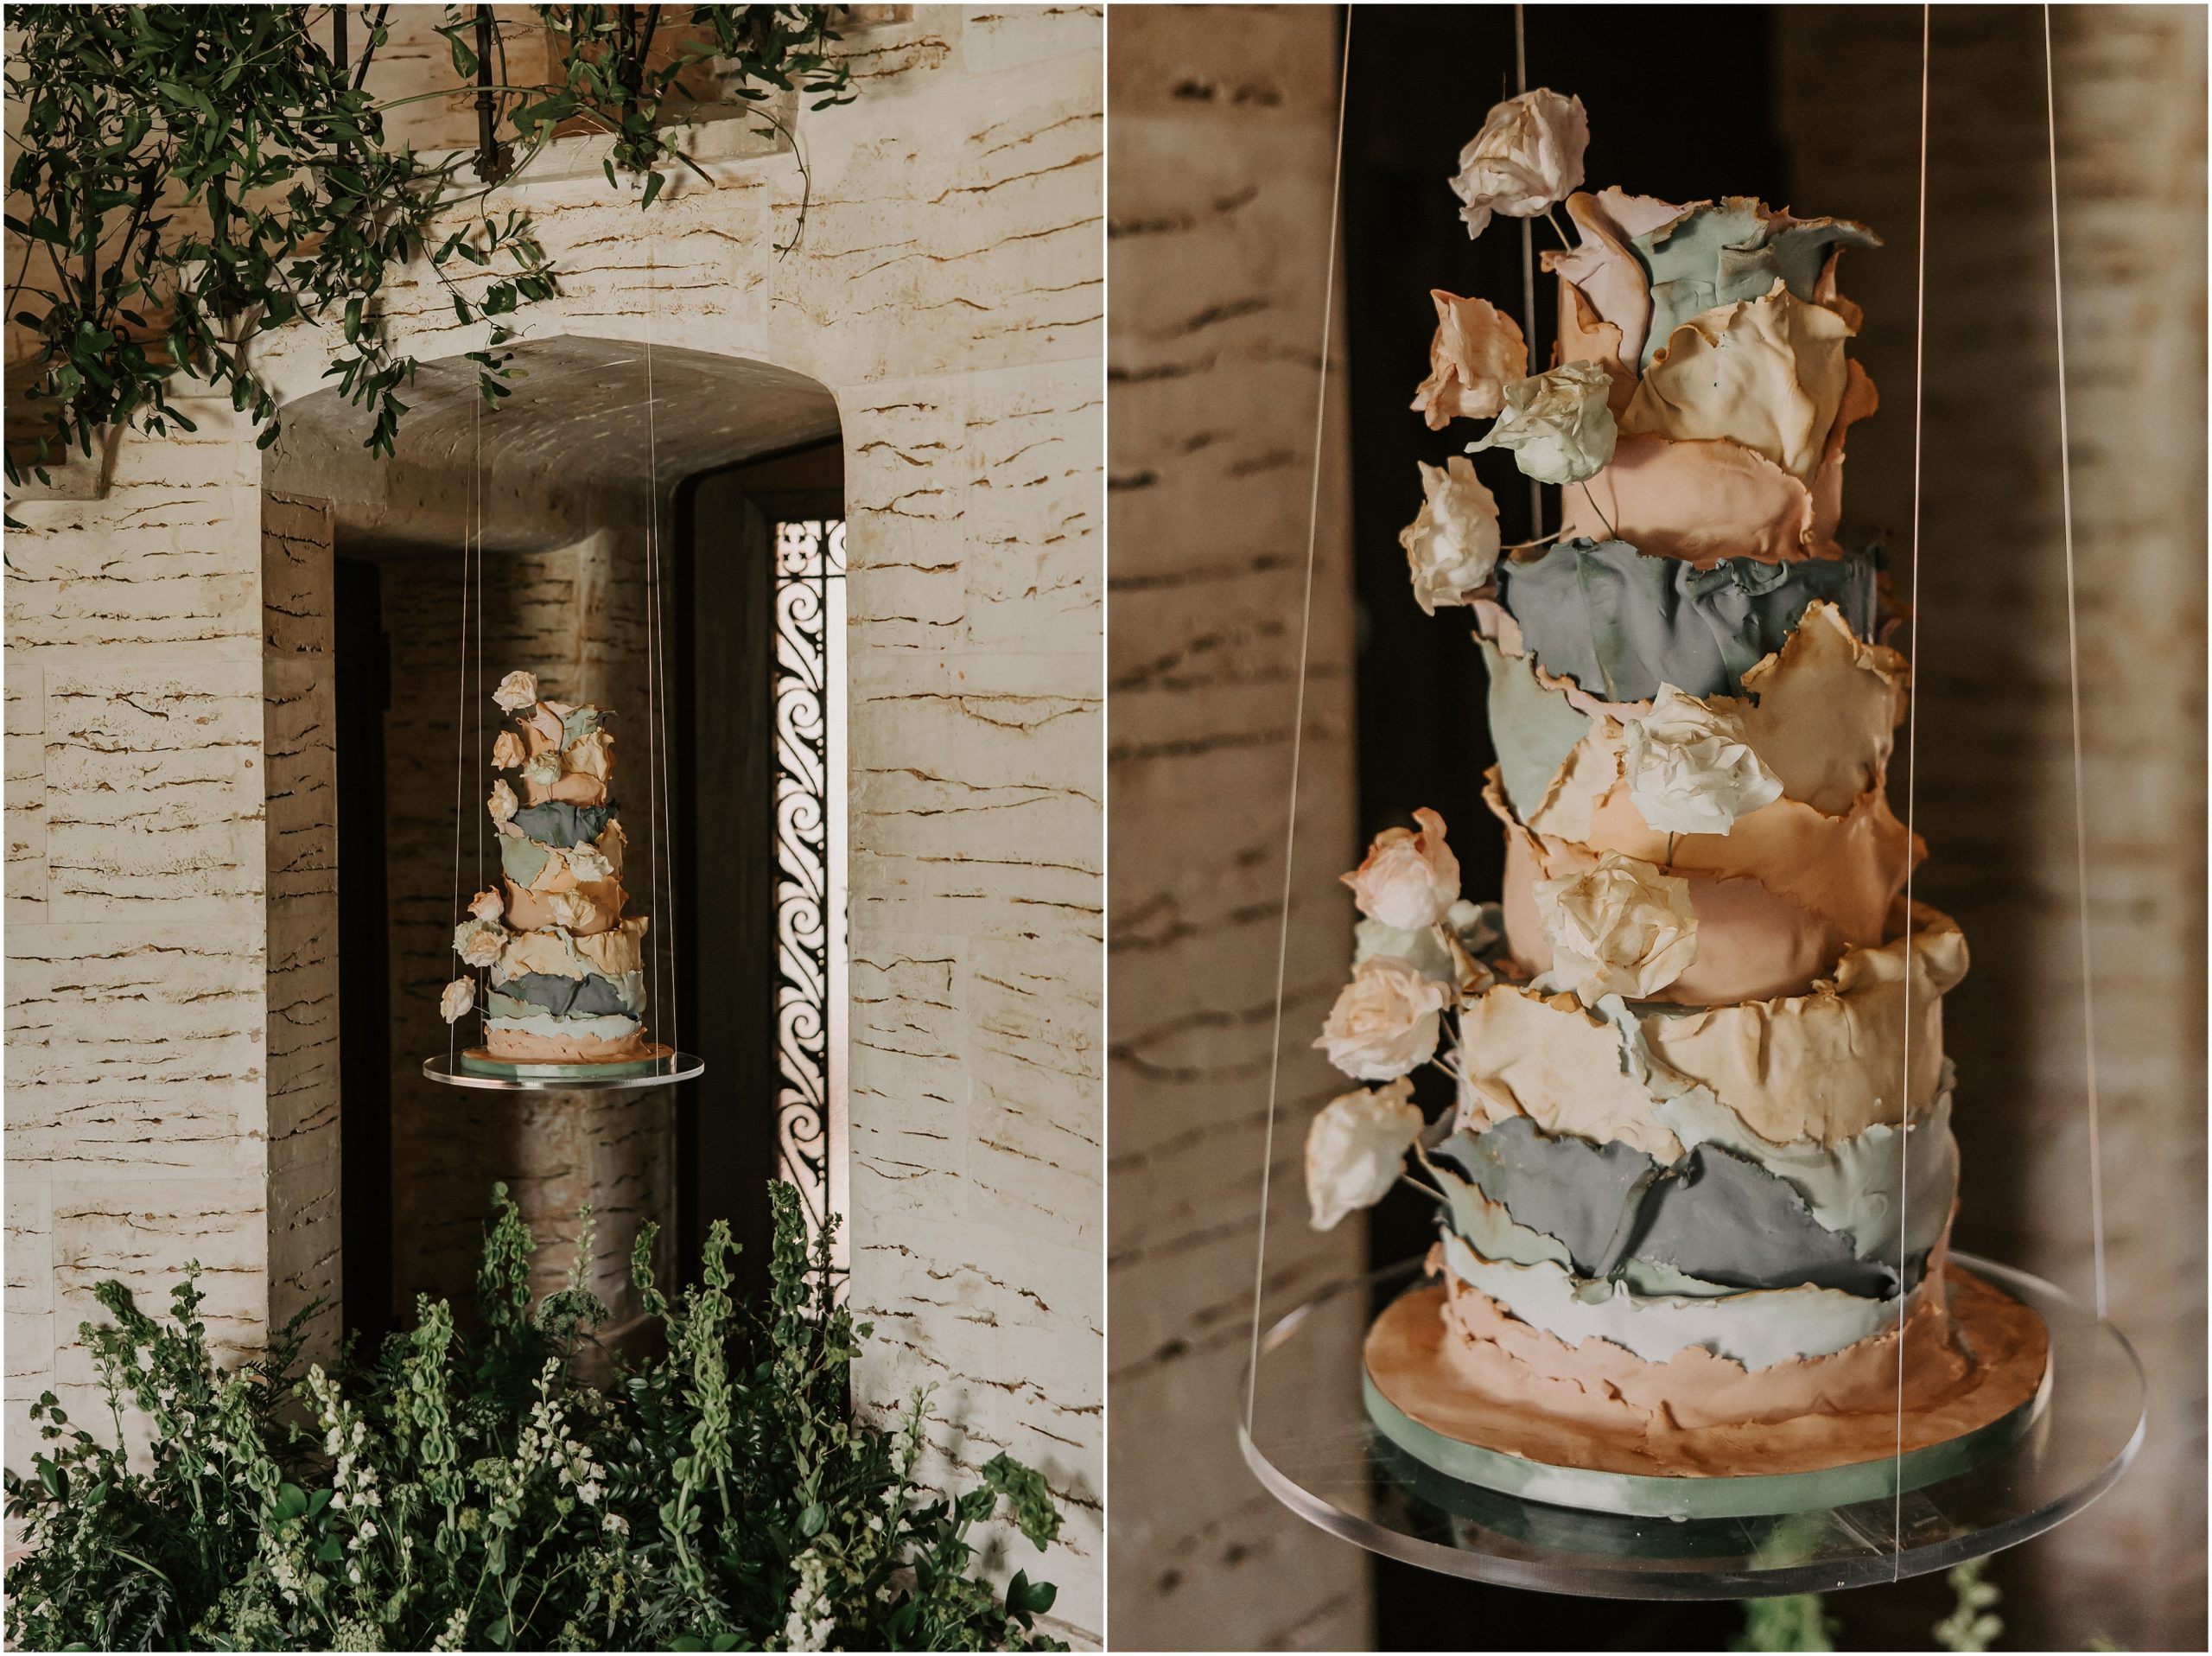 The concept behind the “floating” aspect of this project was to play off of the fact that rainbows seem to “float” in the sky. The floating muted rainbow cake was created ONSITE